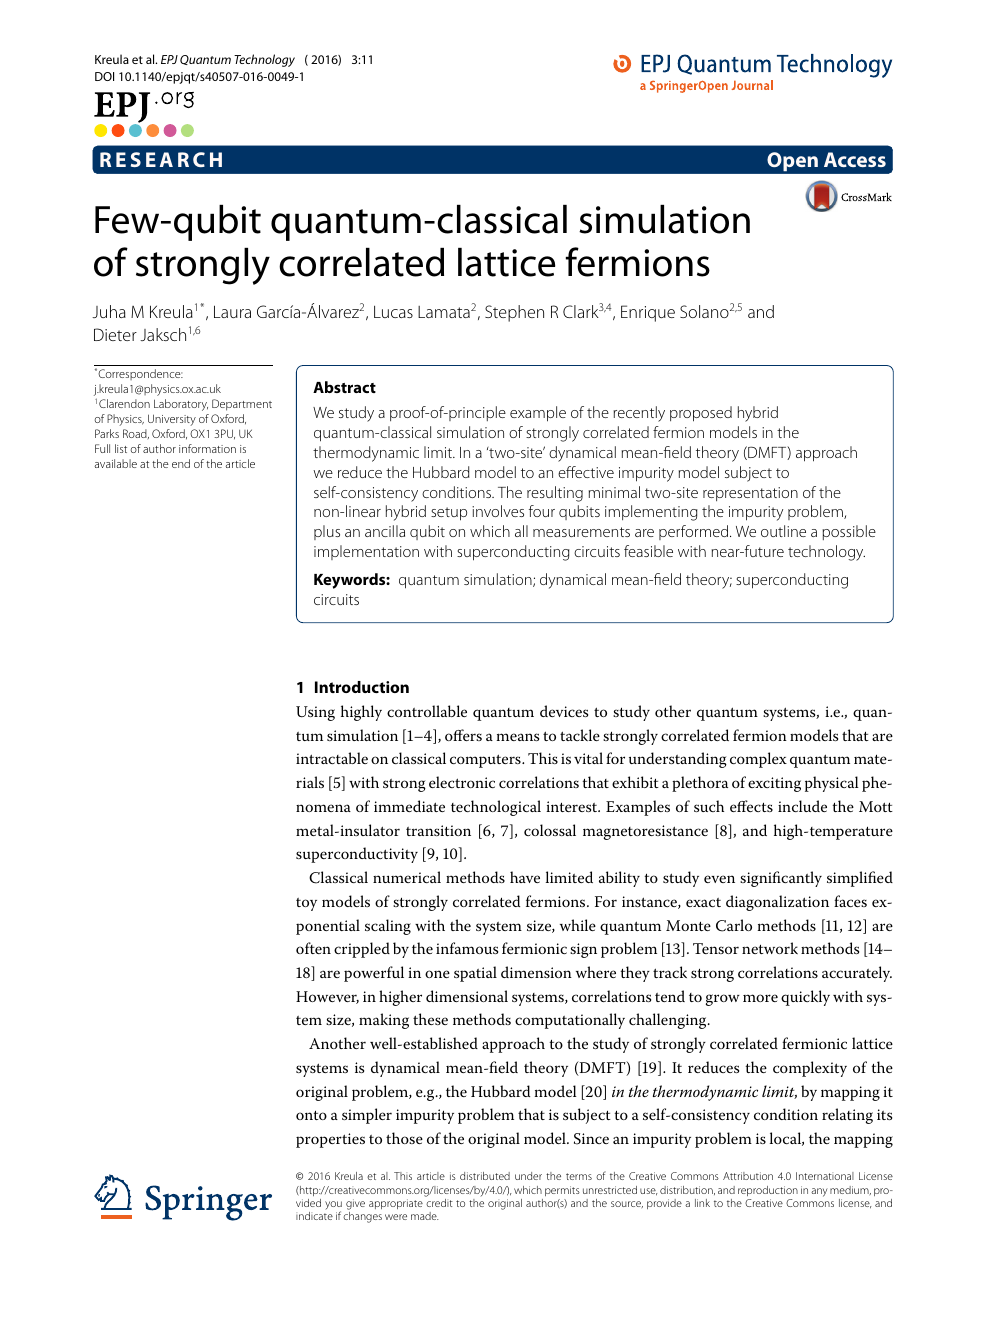 Few Qubit Quantum Classical Simulation Of Strongly Correlated Lattice Fermions Topic Of Research Paper In Nano Technology Download Scholarly Article Pdf And Read For Free On Cyberleninka Open Science Hub